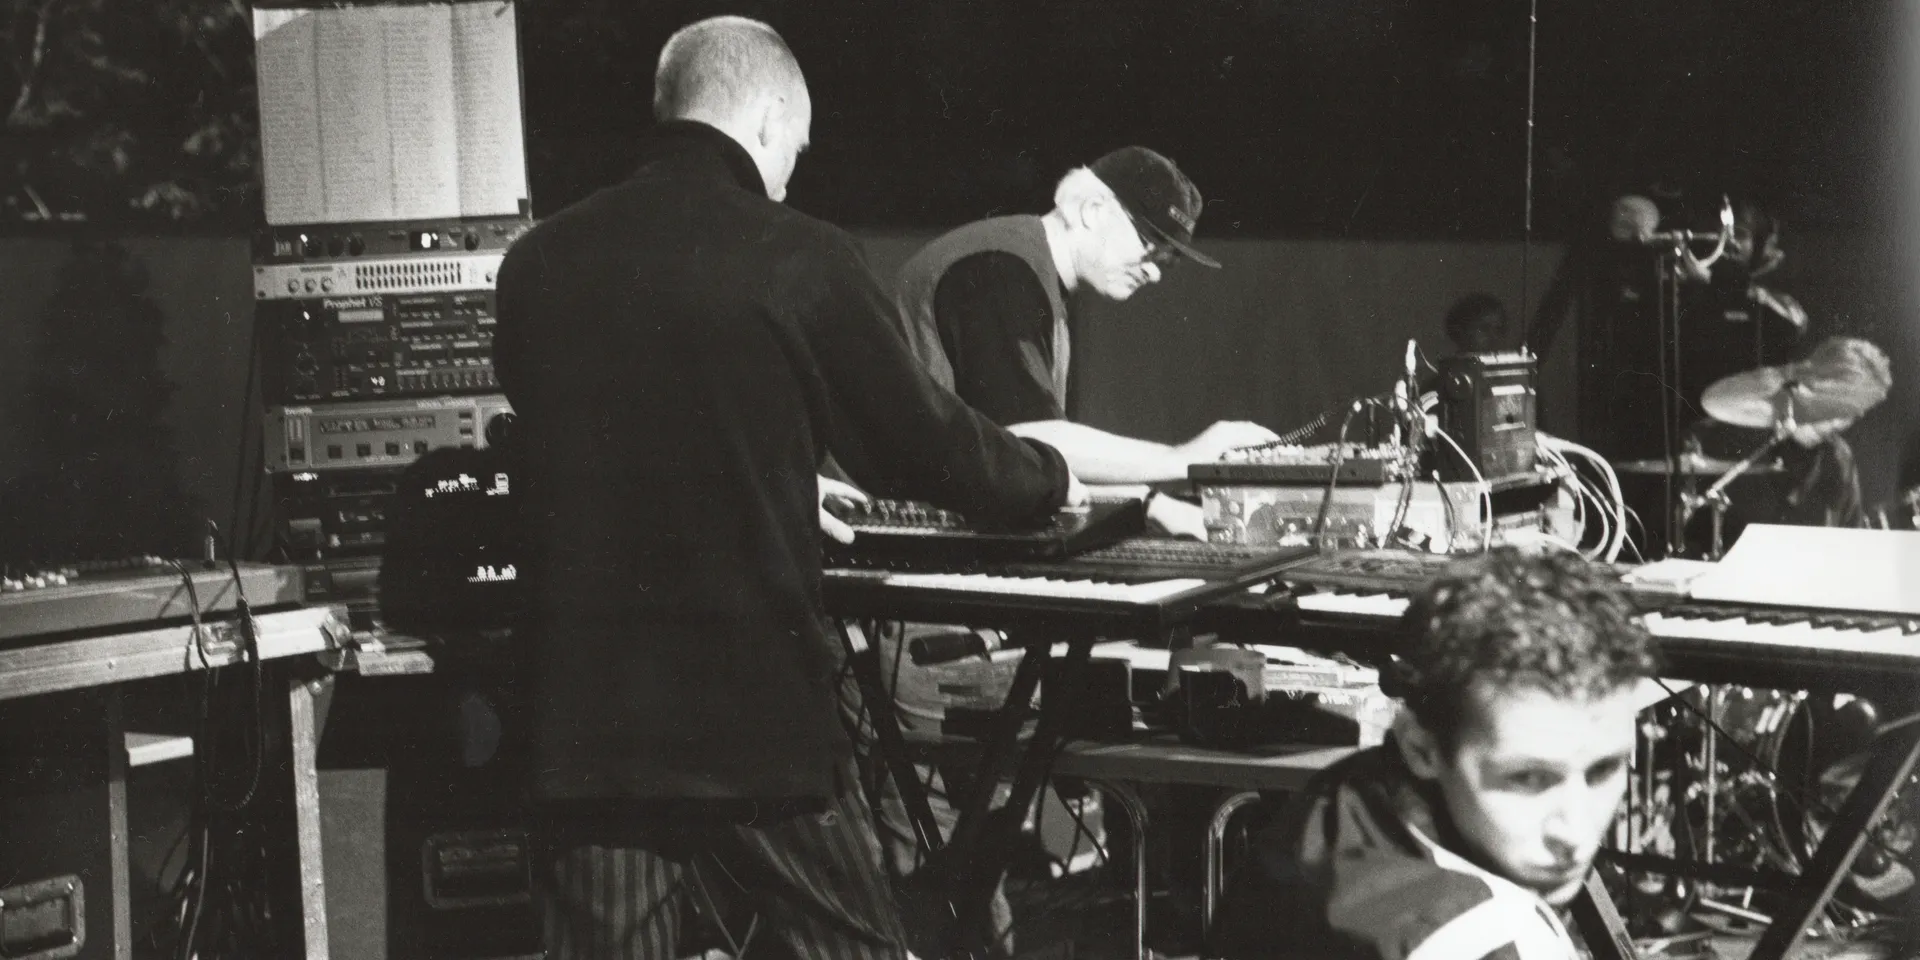 Brian Eno’s Mythic Live Album With Can’s Holger Czukay and J. Peter Schwalm Set for Release